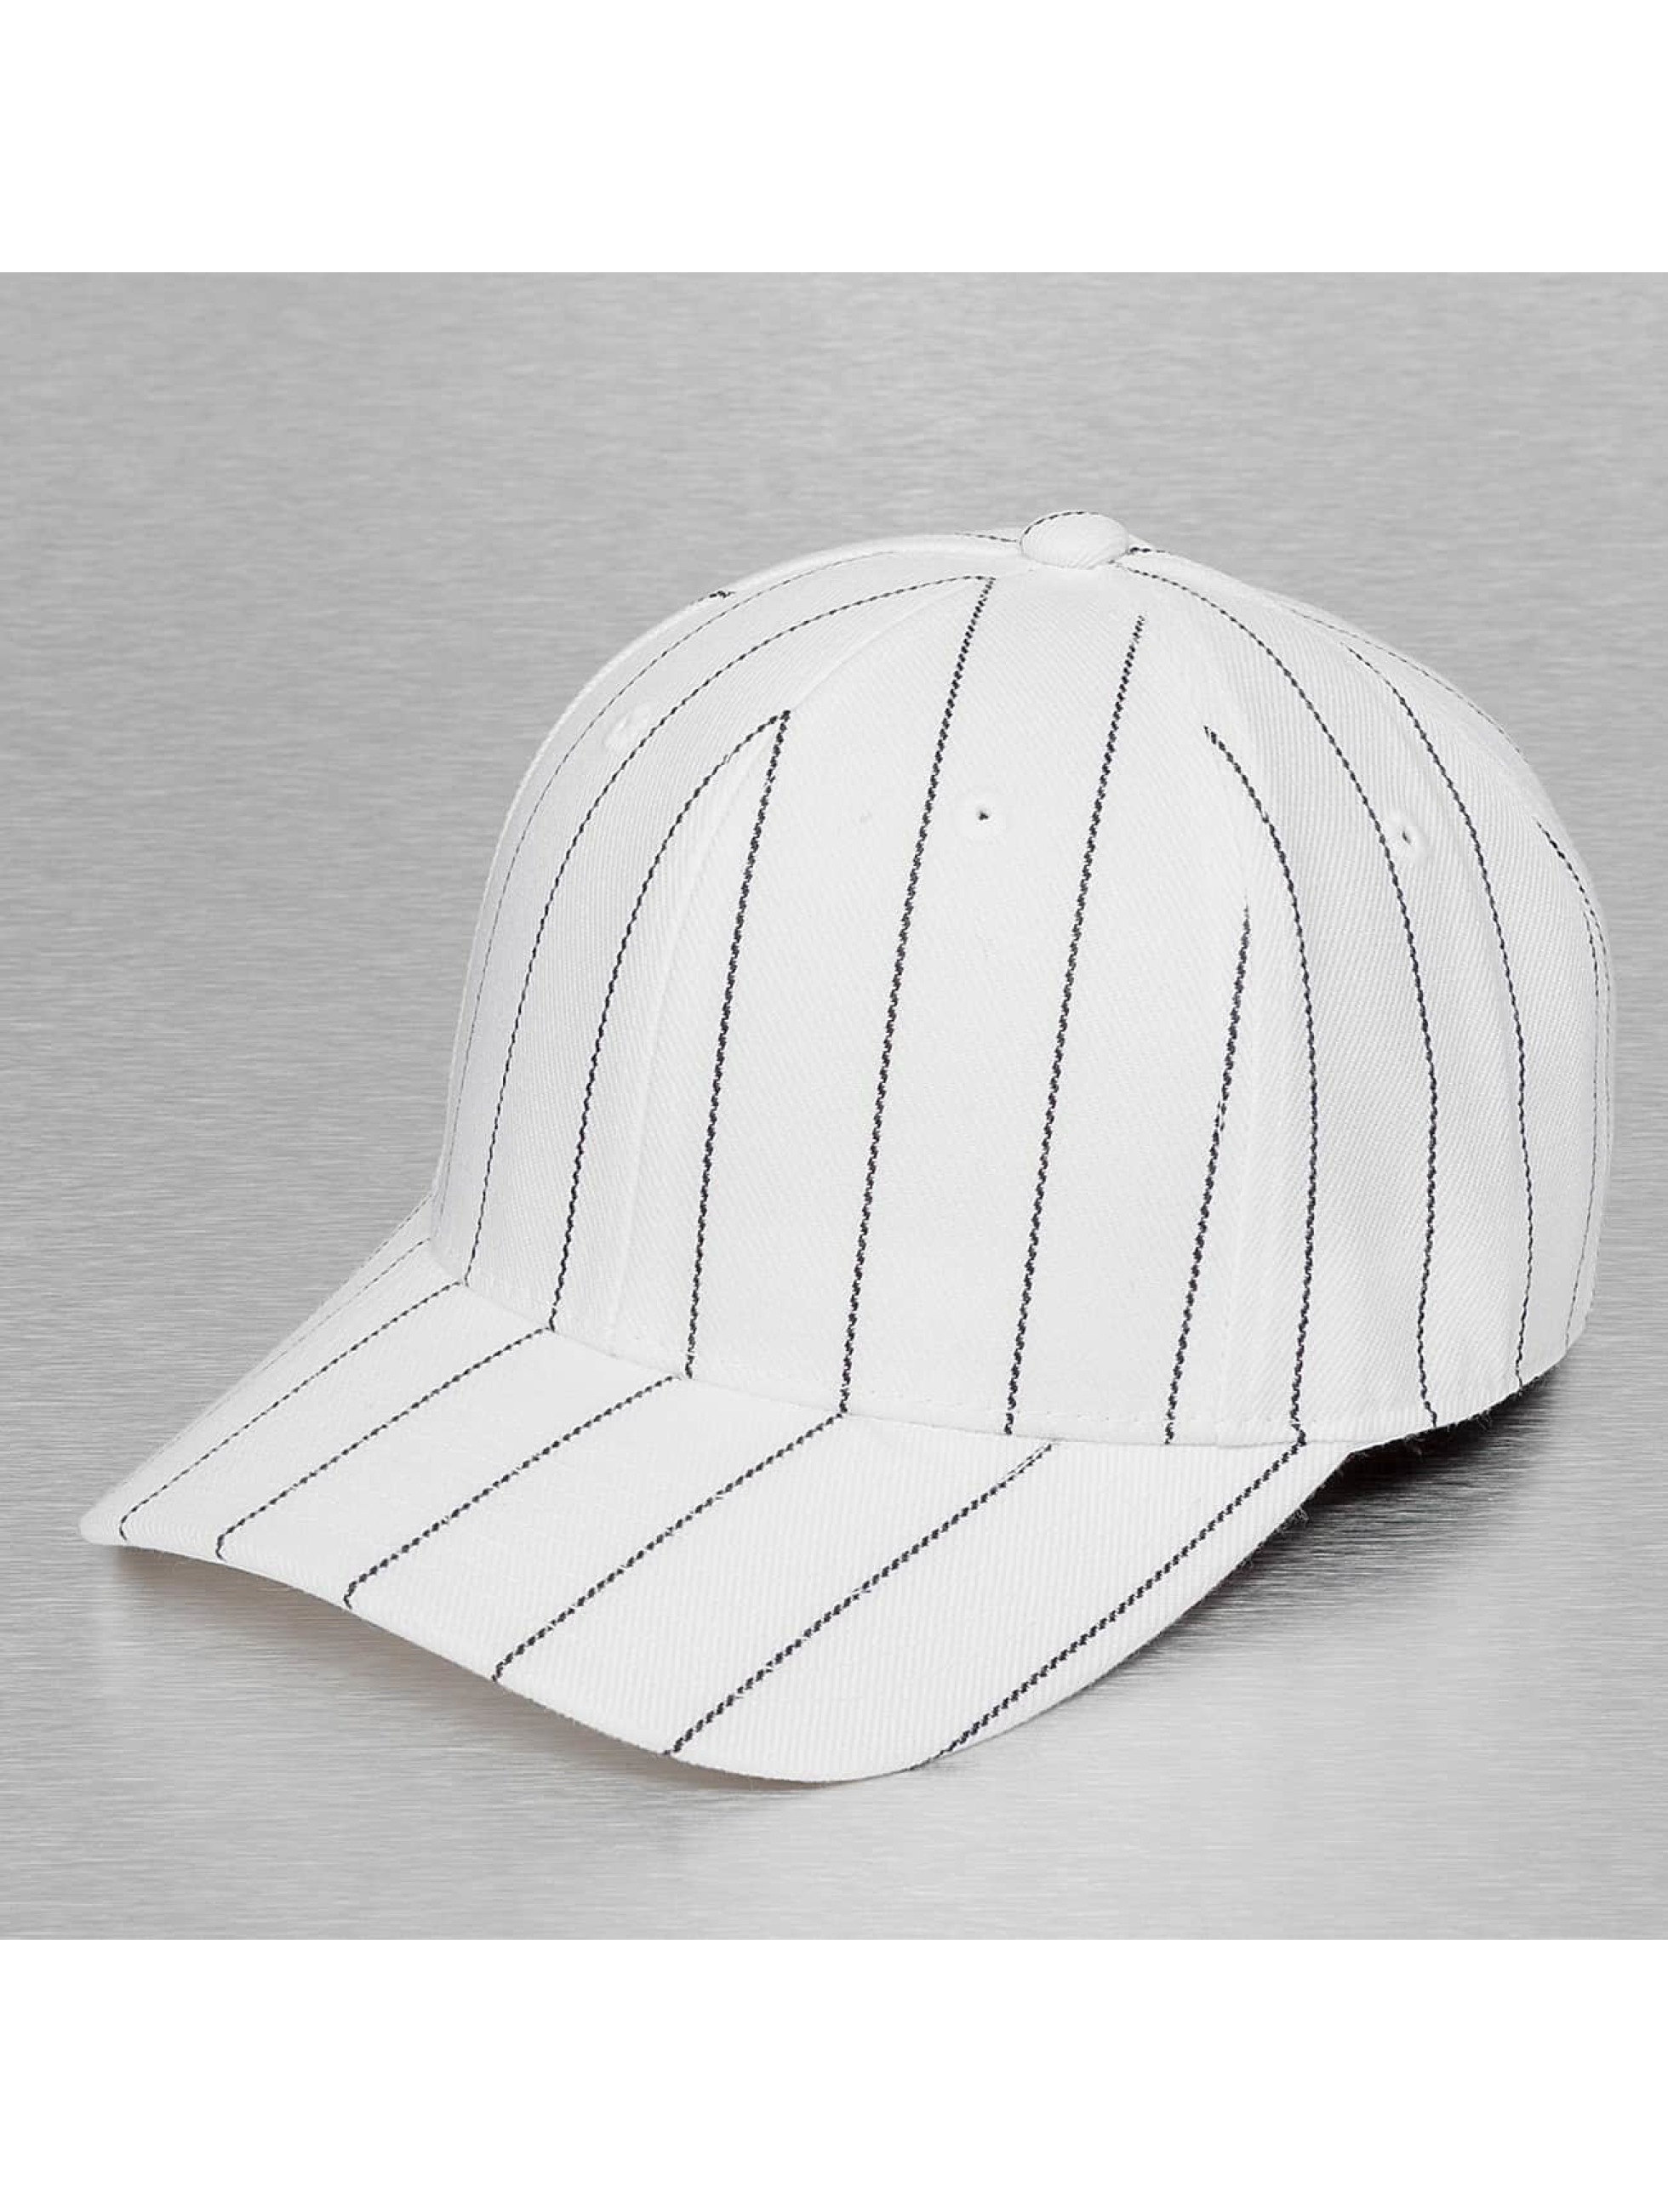  Cap Crony Casquette / Fitted Pin Striped en blanc